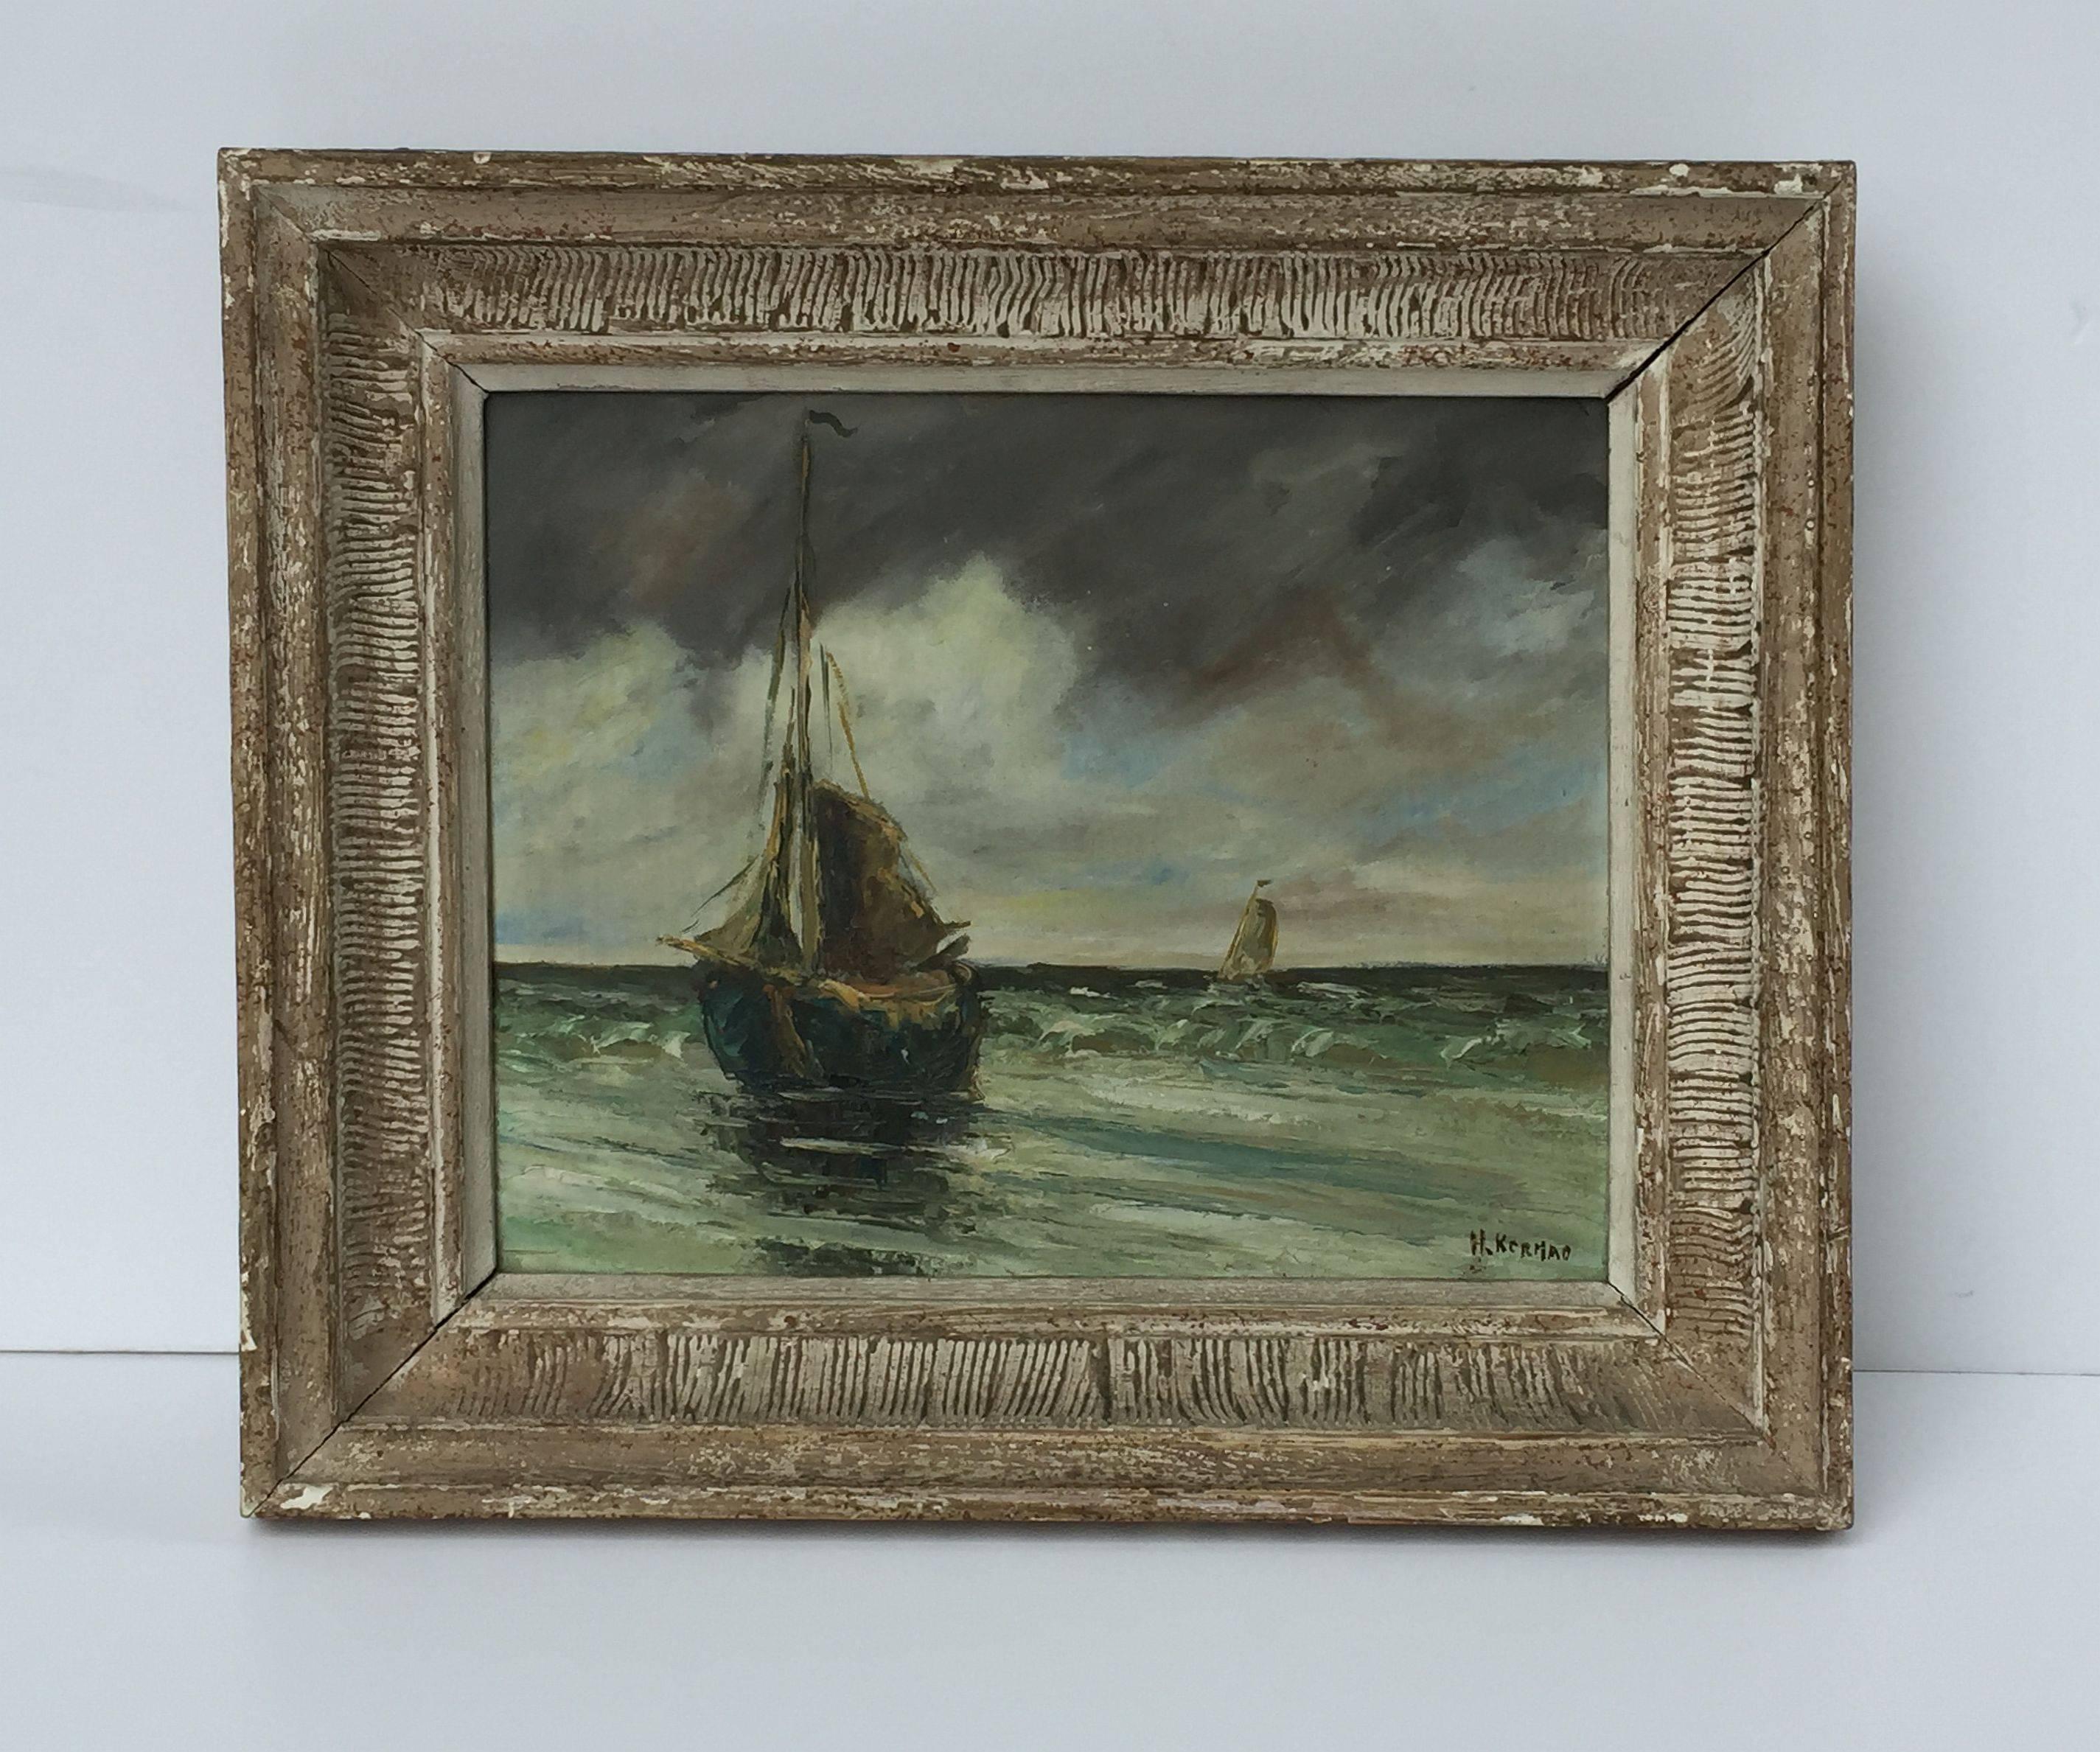 A fine French oil painting on board of sailing ships, signed by H. Kermao.